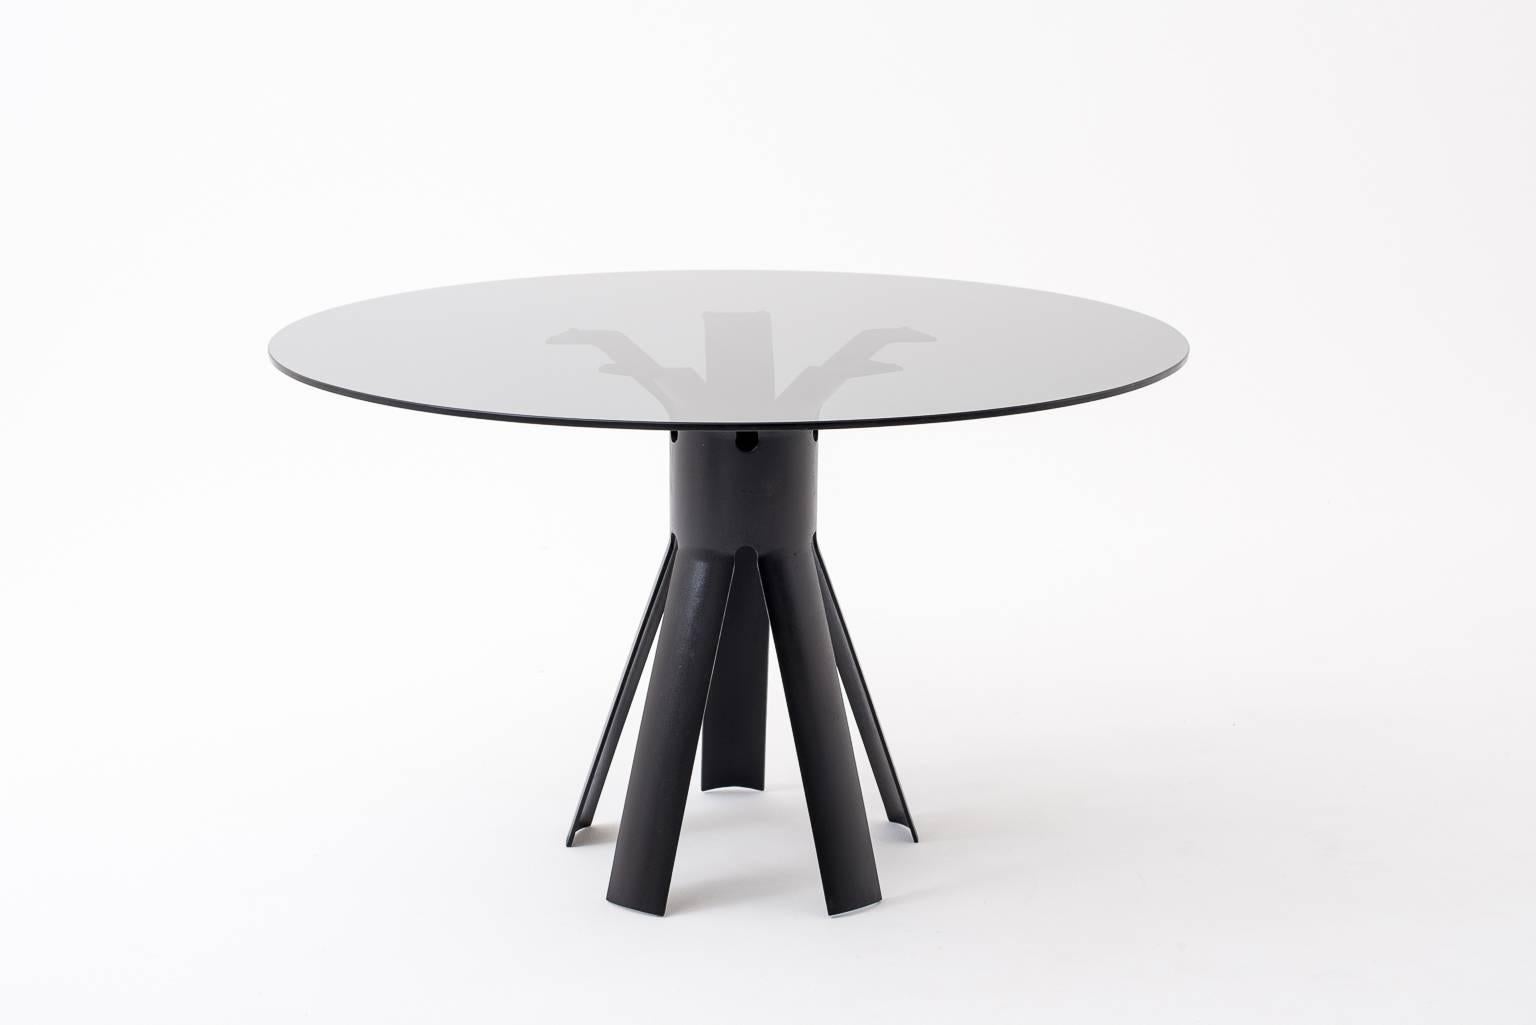 Sculptural ‘Longobardo’ table by Angelo Mangiarotti for Skipper, Italy, 1970.
Longobardo was a Germanic nation lived in the Northern parth of Italy in the time of the Romans between 568 – 774.
The metal base was deliberately kept raw to emphasize